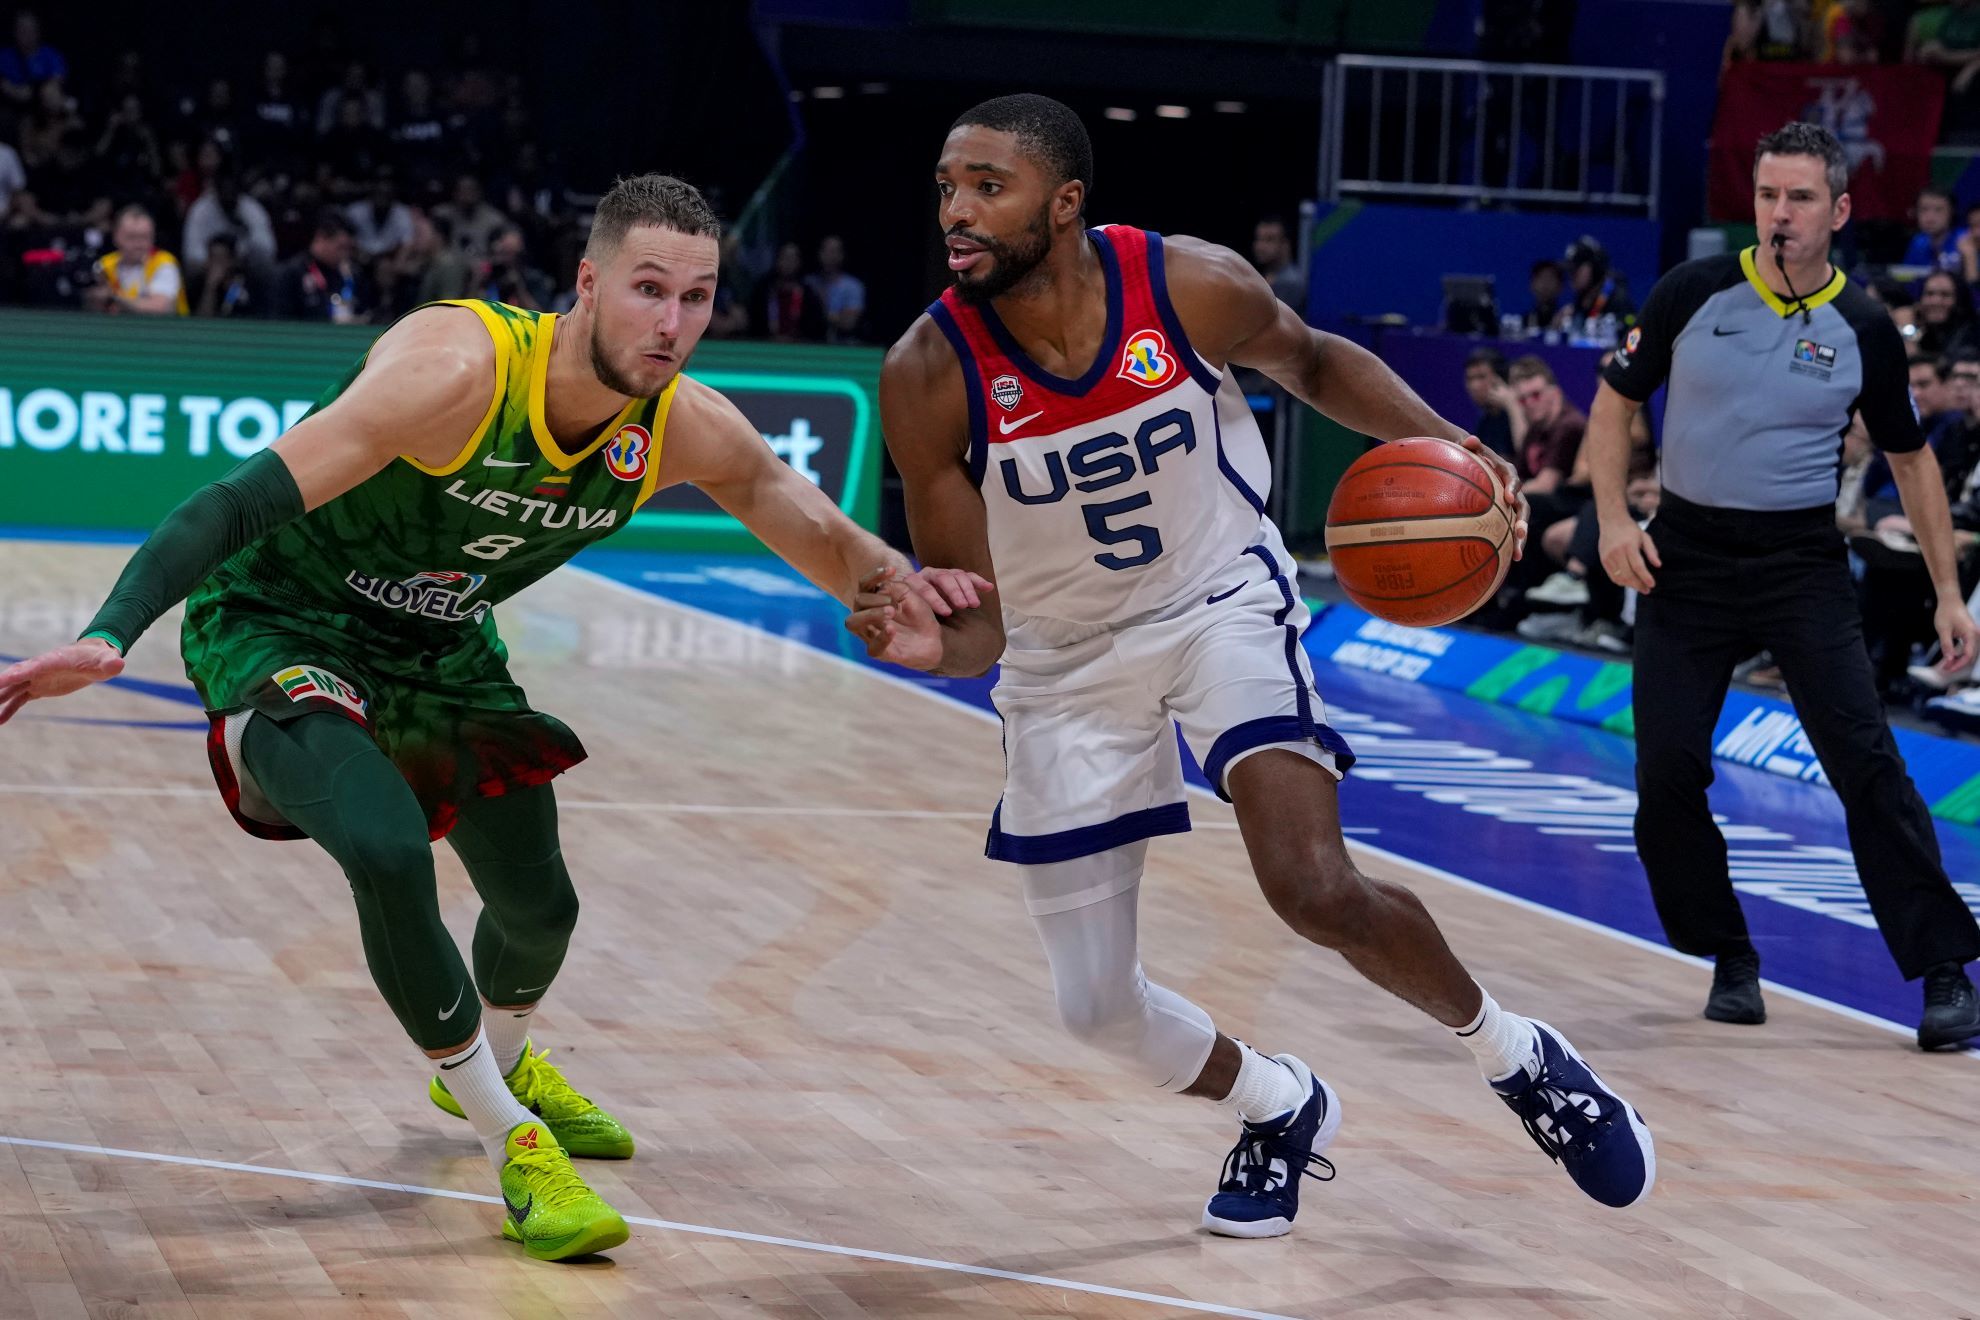 US falls to Lithuania at Basketball World Cup but still qualifies for Paris Olympics